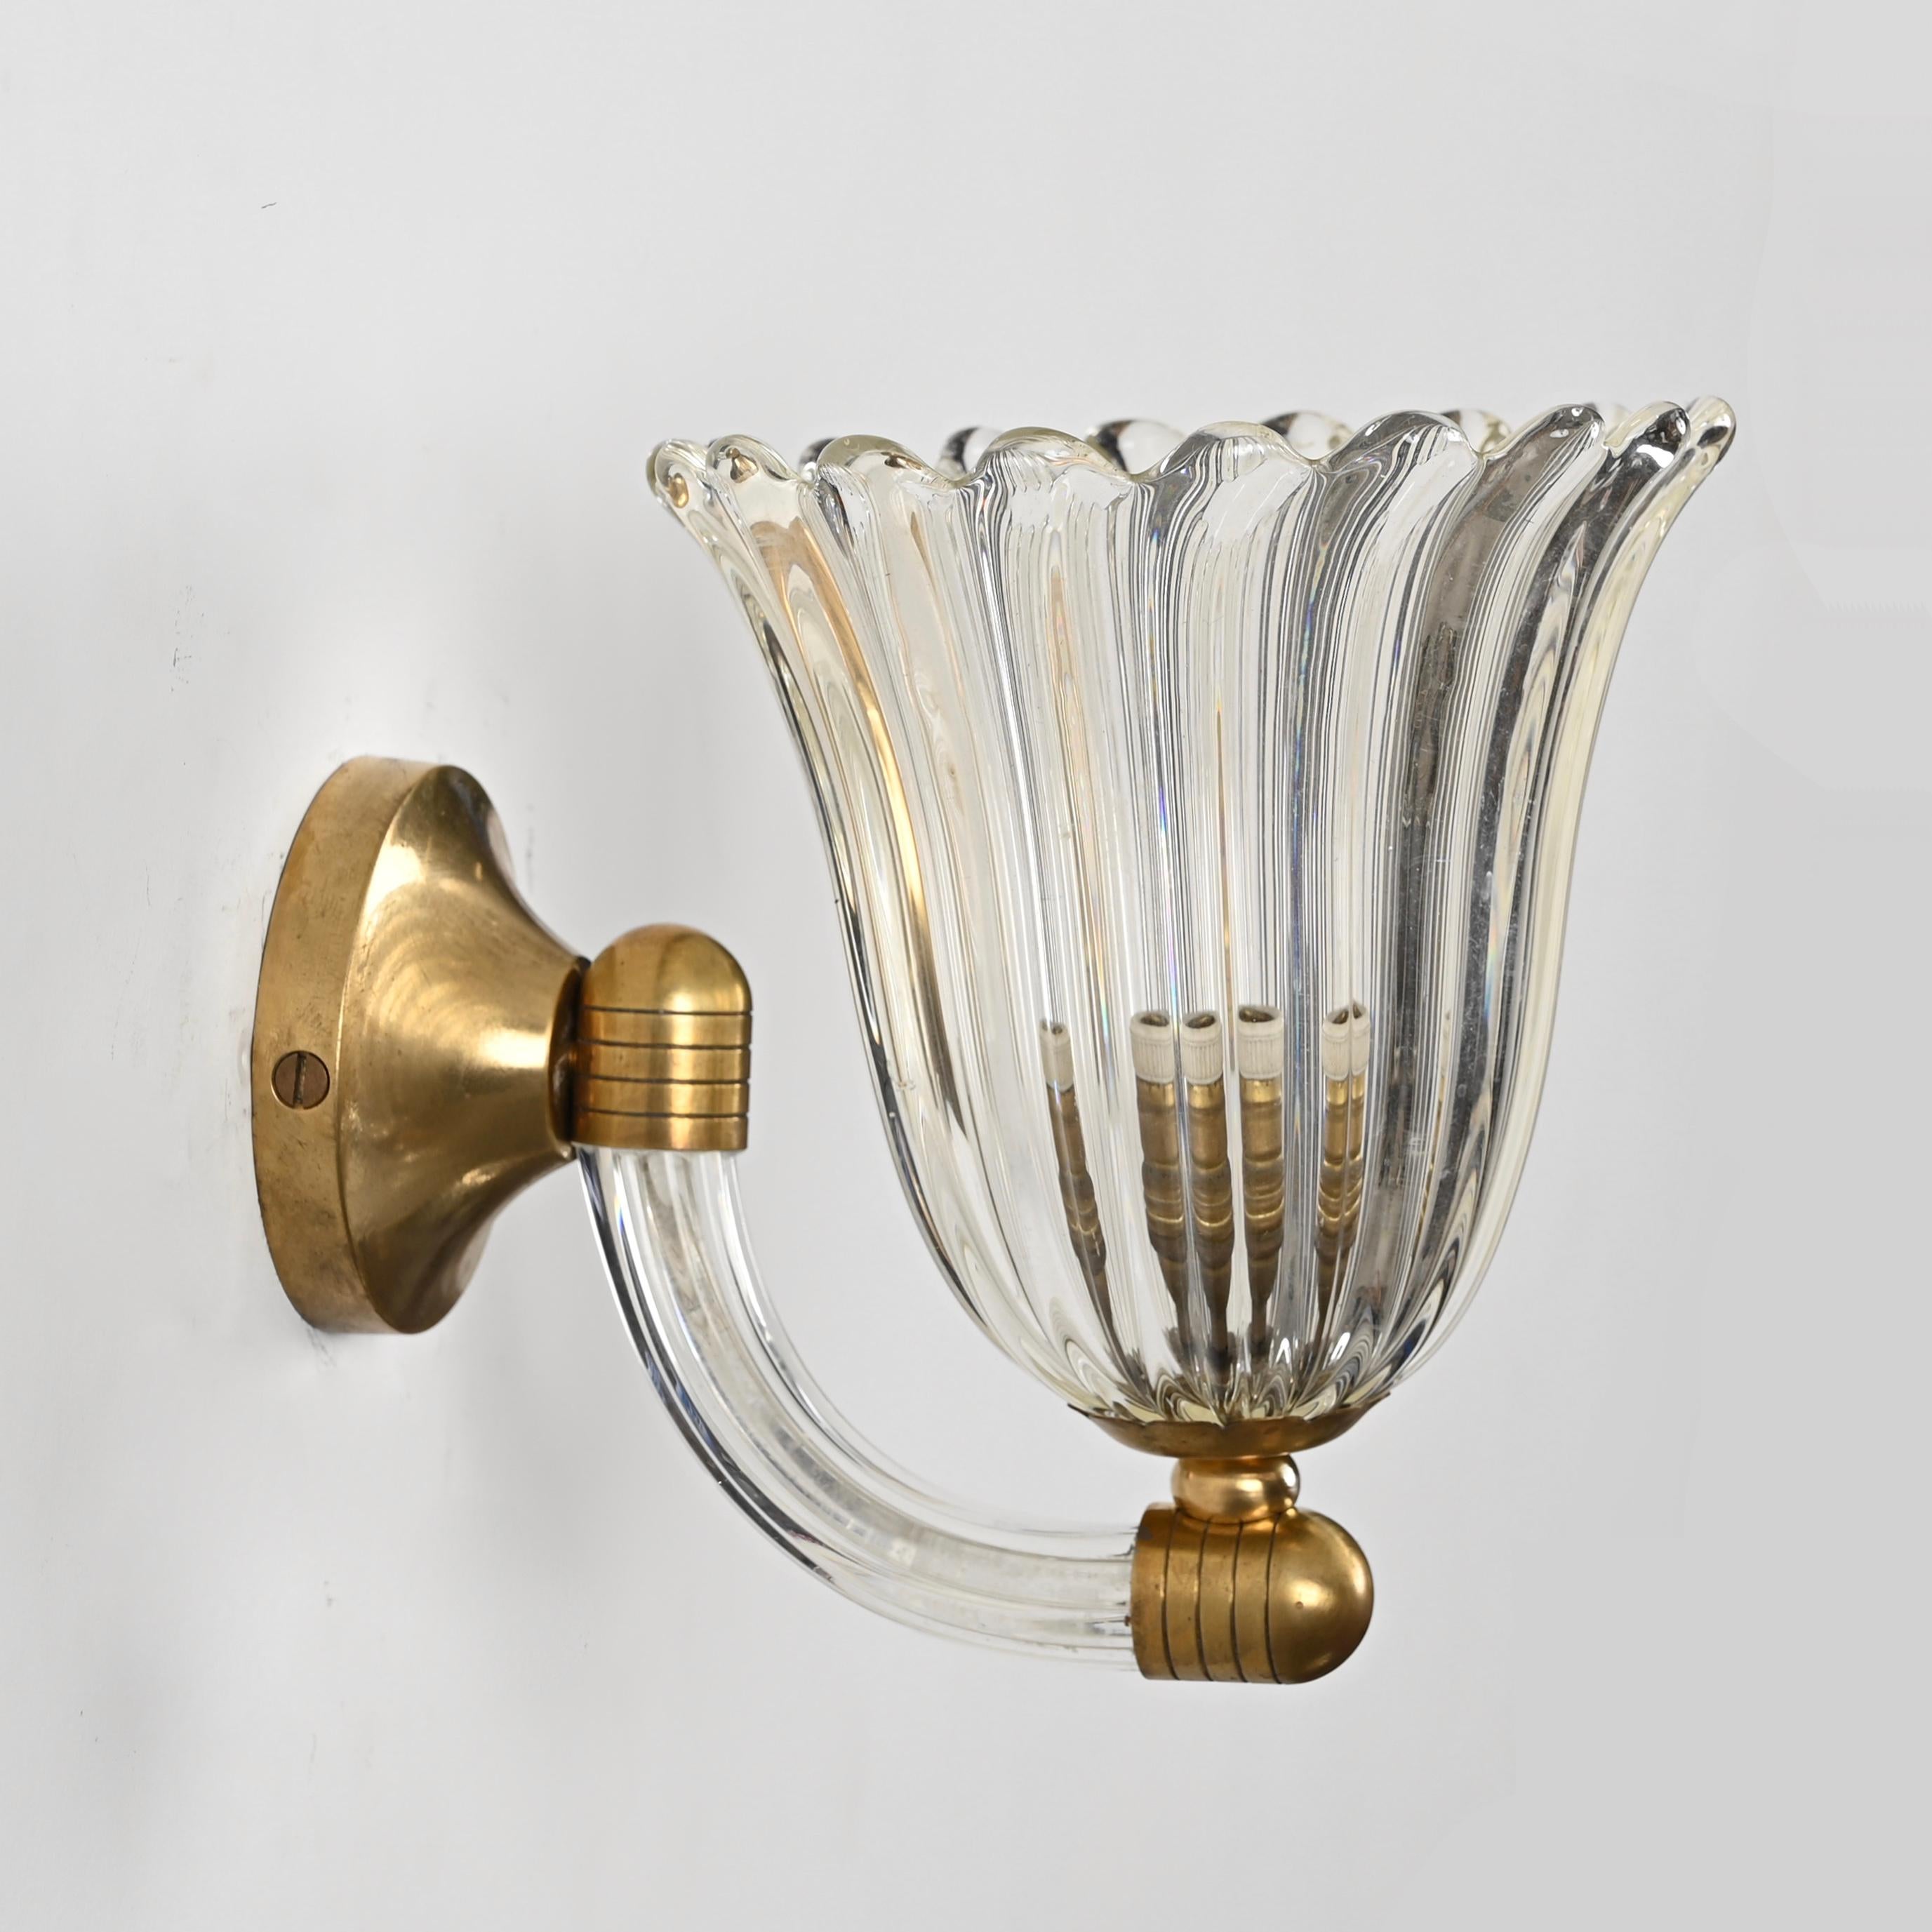 Spectacular pair of mid-century bellflower shaped sconces in Murano hand-blown crystal glass and solid brass. These wonderful lights were designed in Italy by Barovier & Toso in the 1950s.

These finely crafted Murano sconces have a magnificent